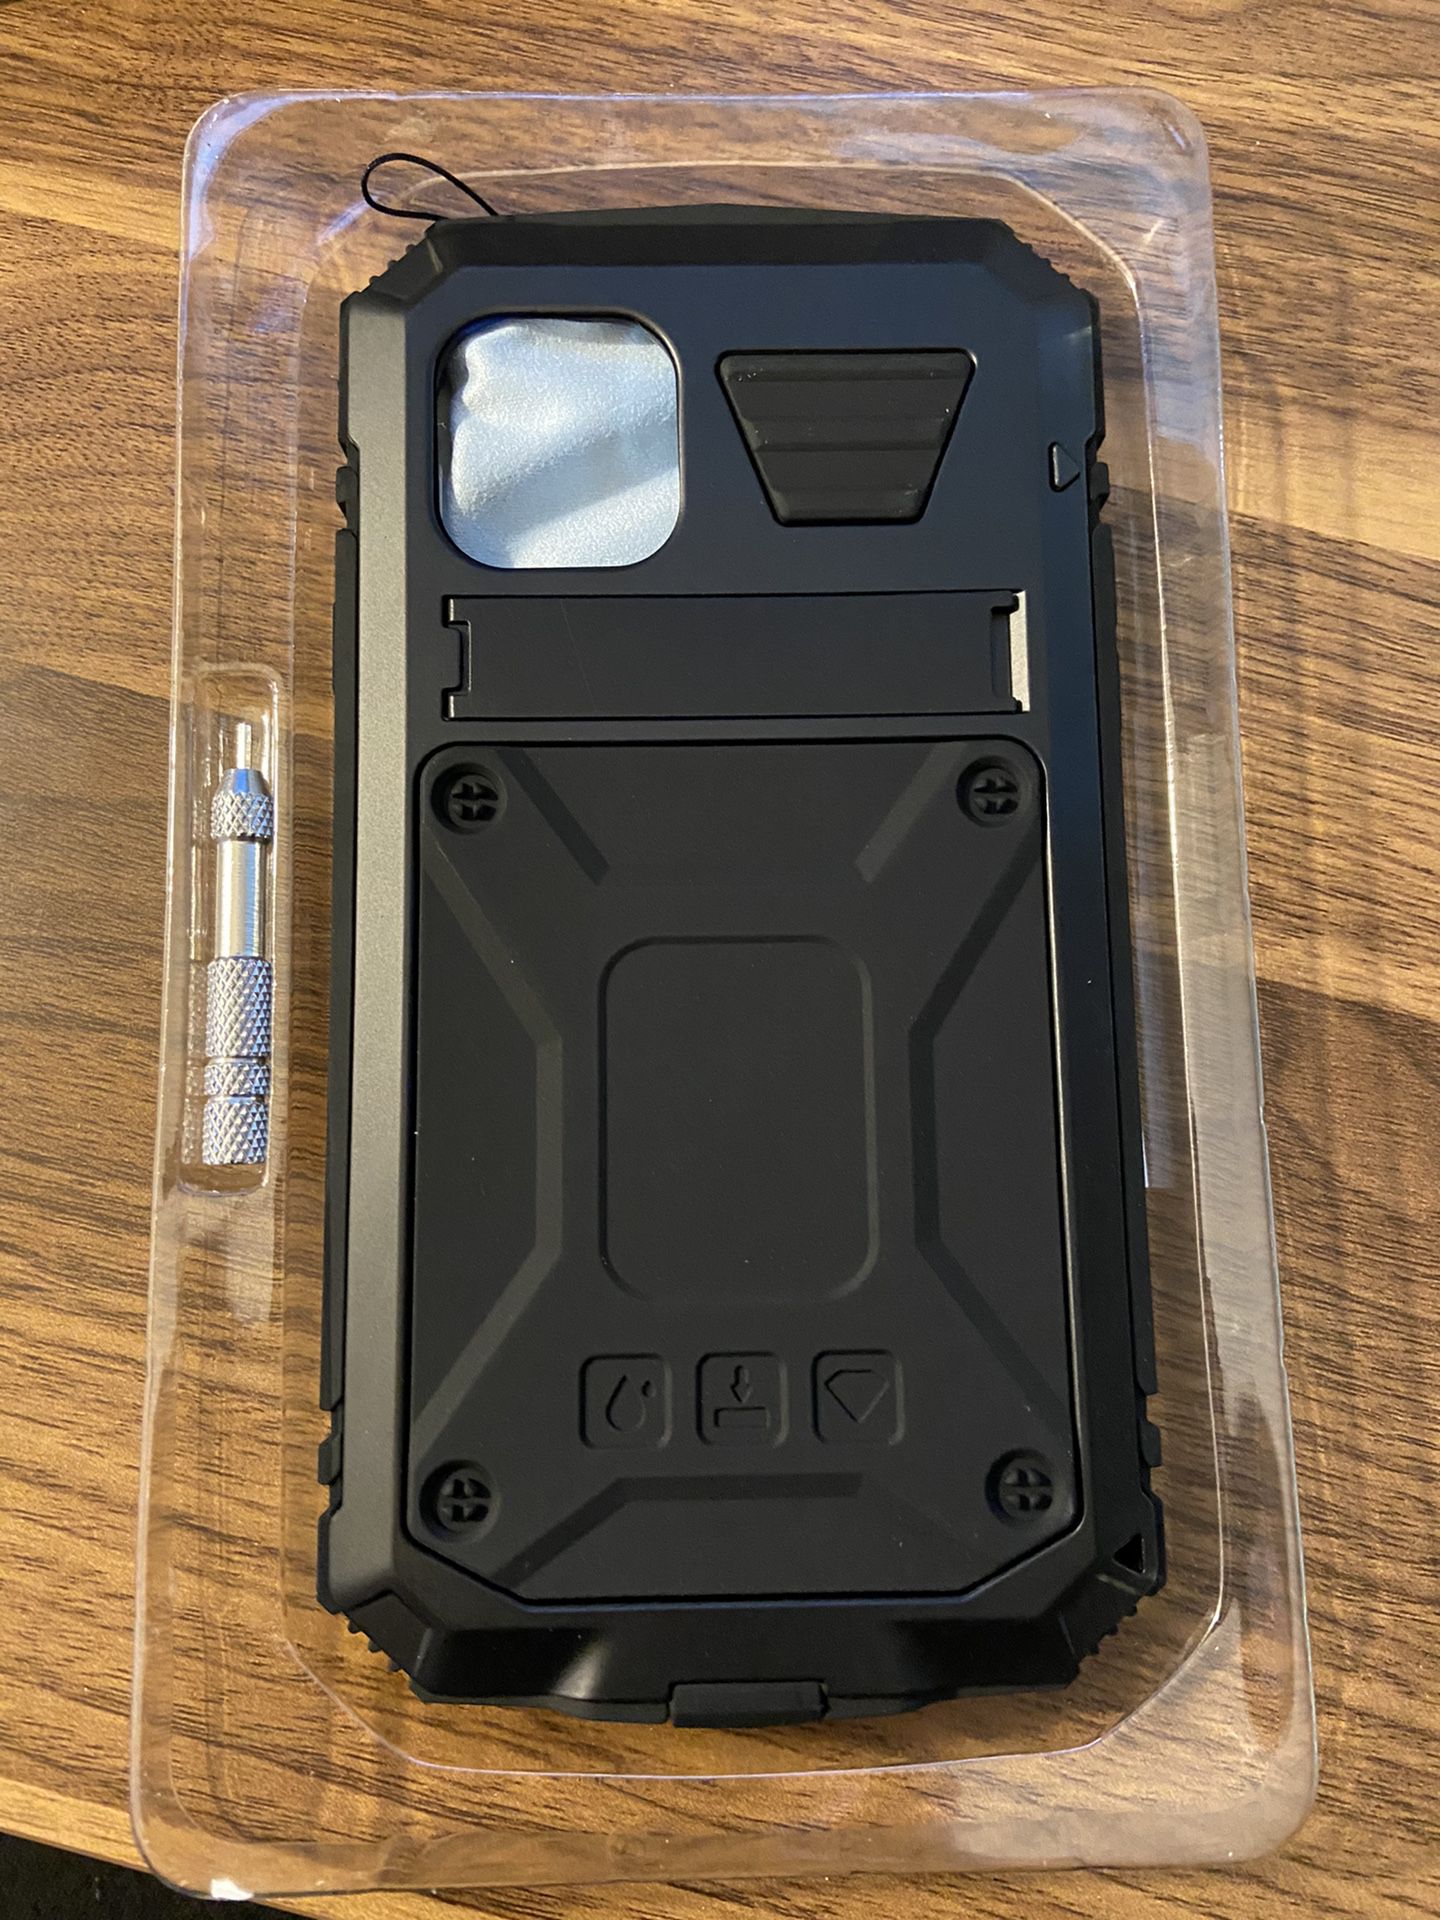 Aluminium Metal Waterproof Case Built-in Screen Shockproof Dustproof Full Body Protector Case Heavy Duty Cover with Kickstand for iPhone 11